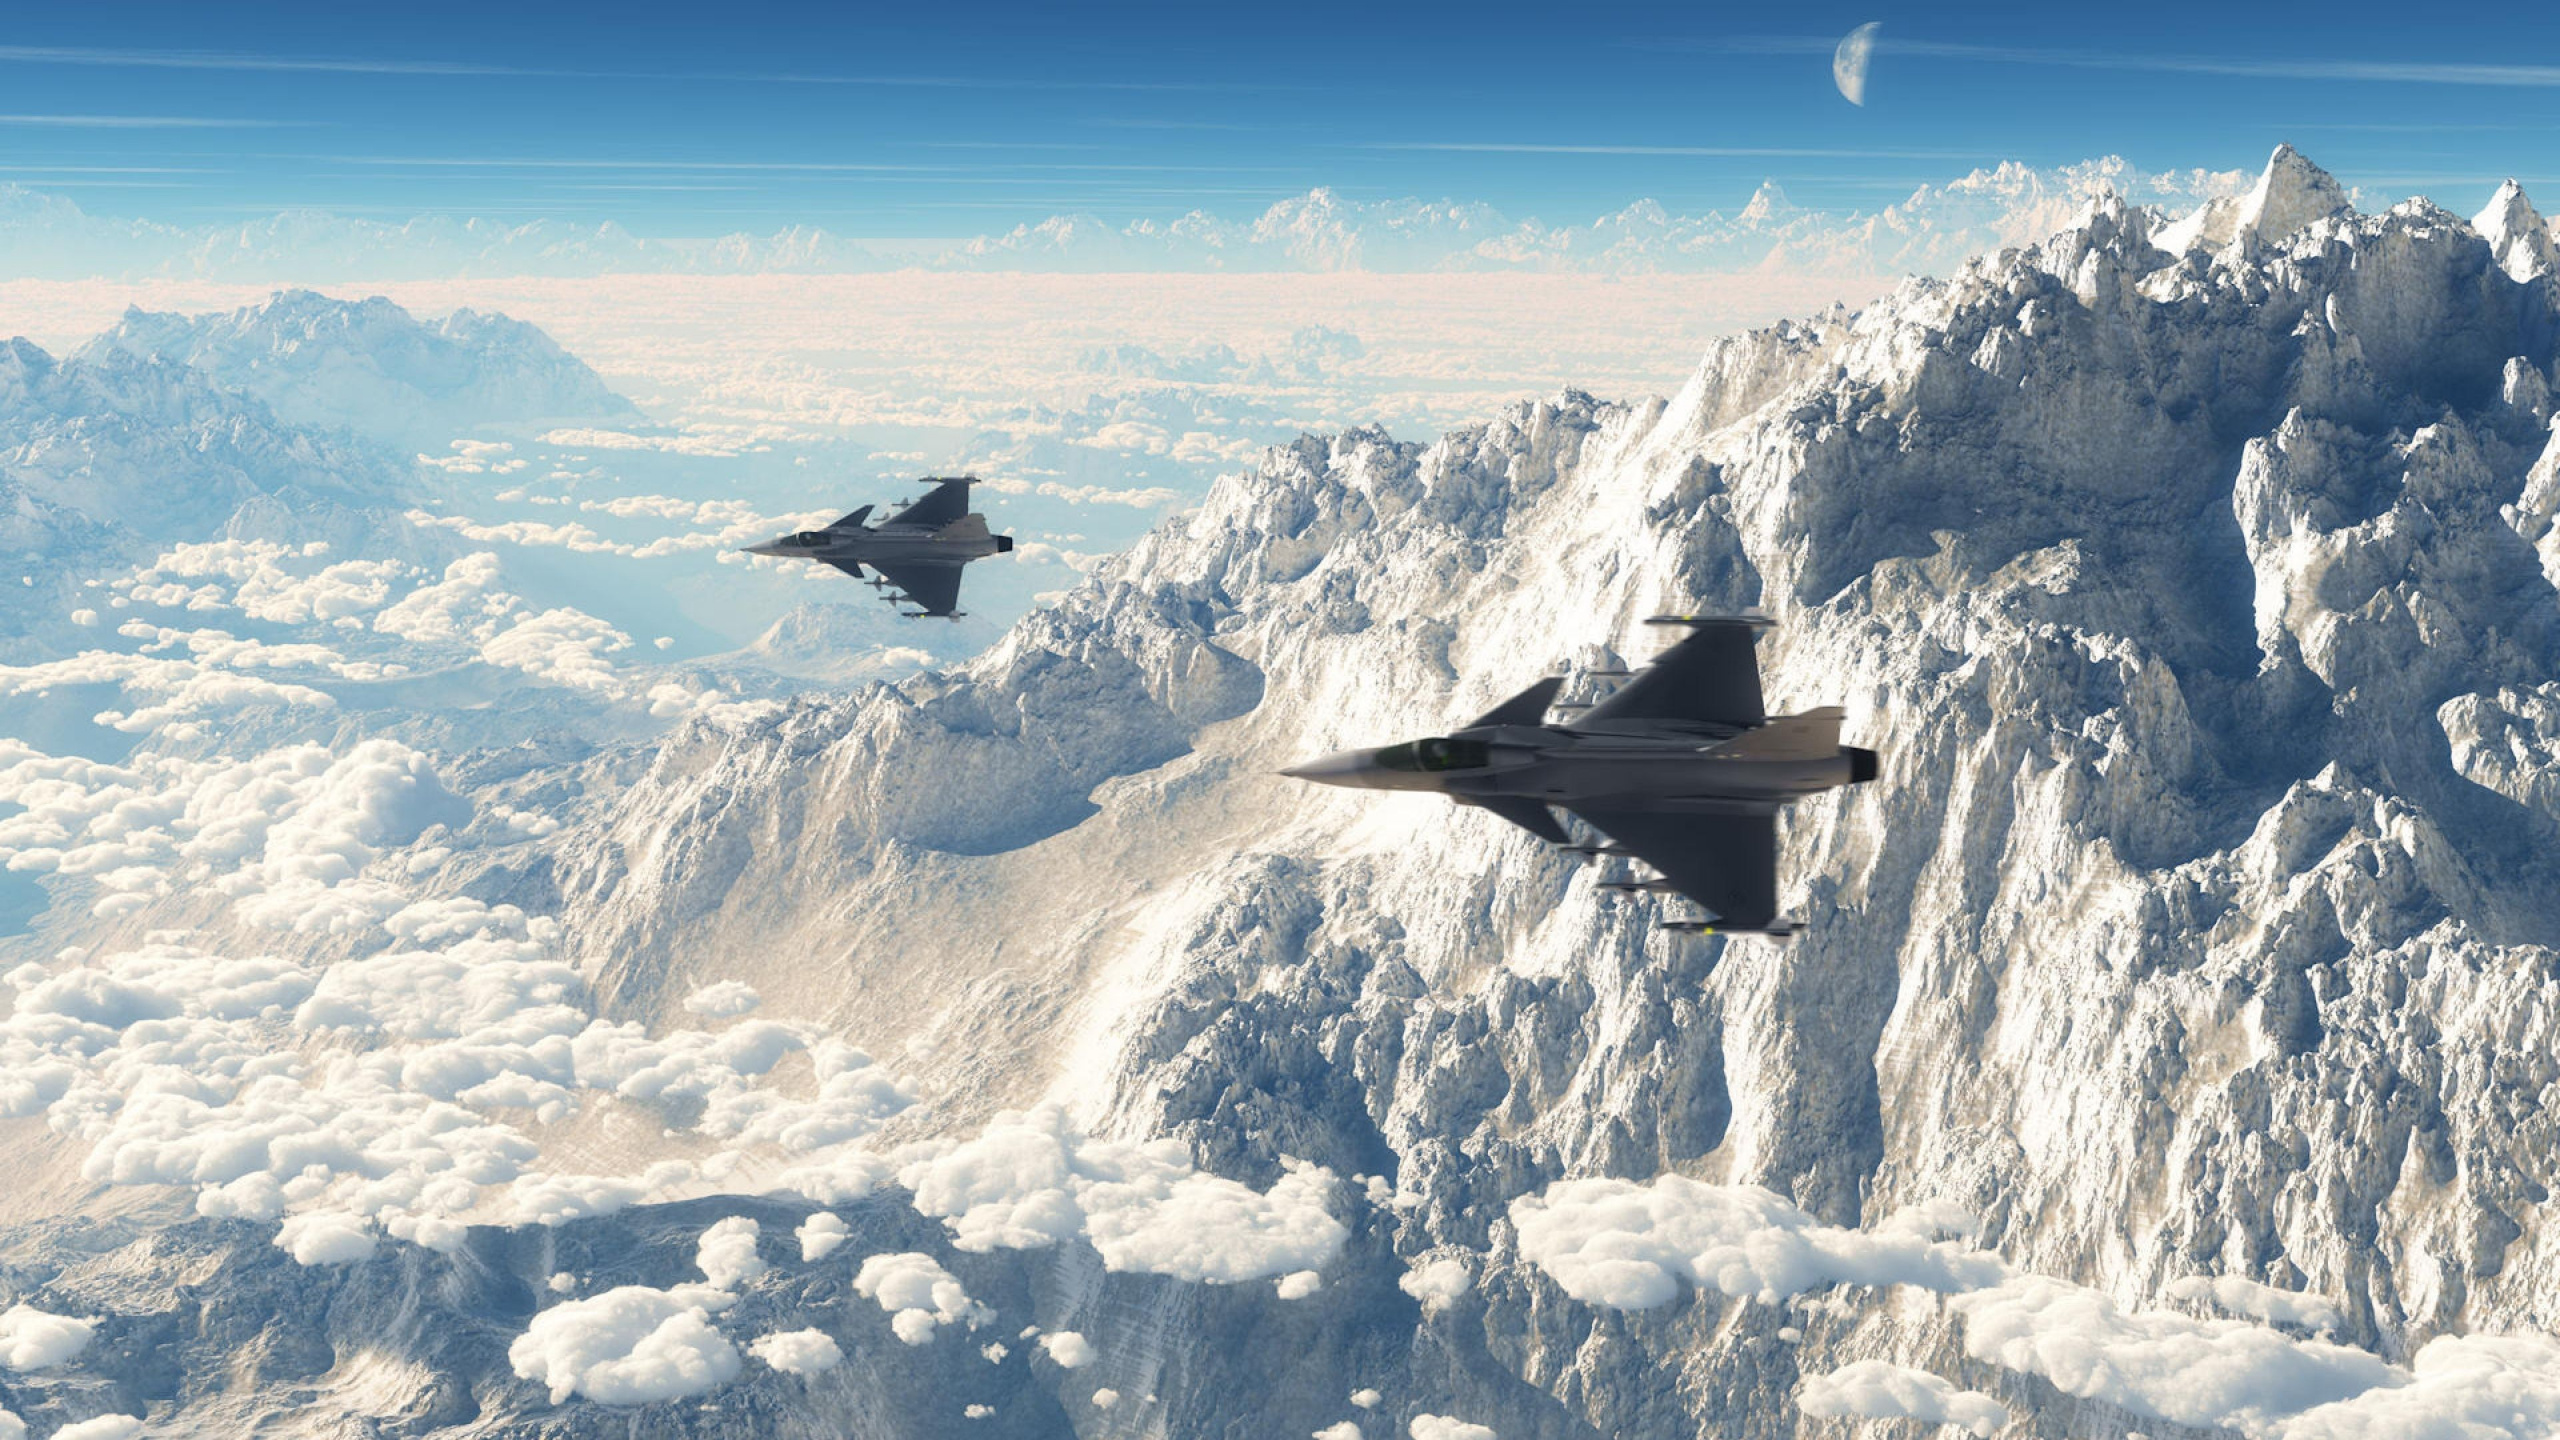 Black Fighter Plane Flying Over Snow Covered Mountain During Daytime. Wallpaper in 2560x1440 Resolution